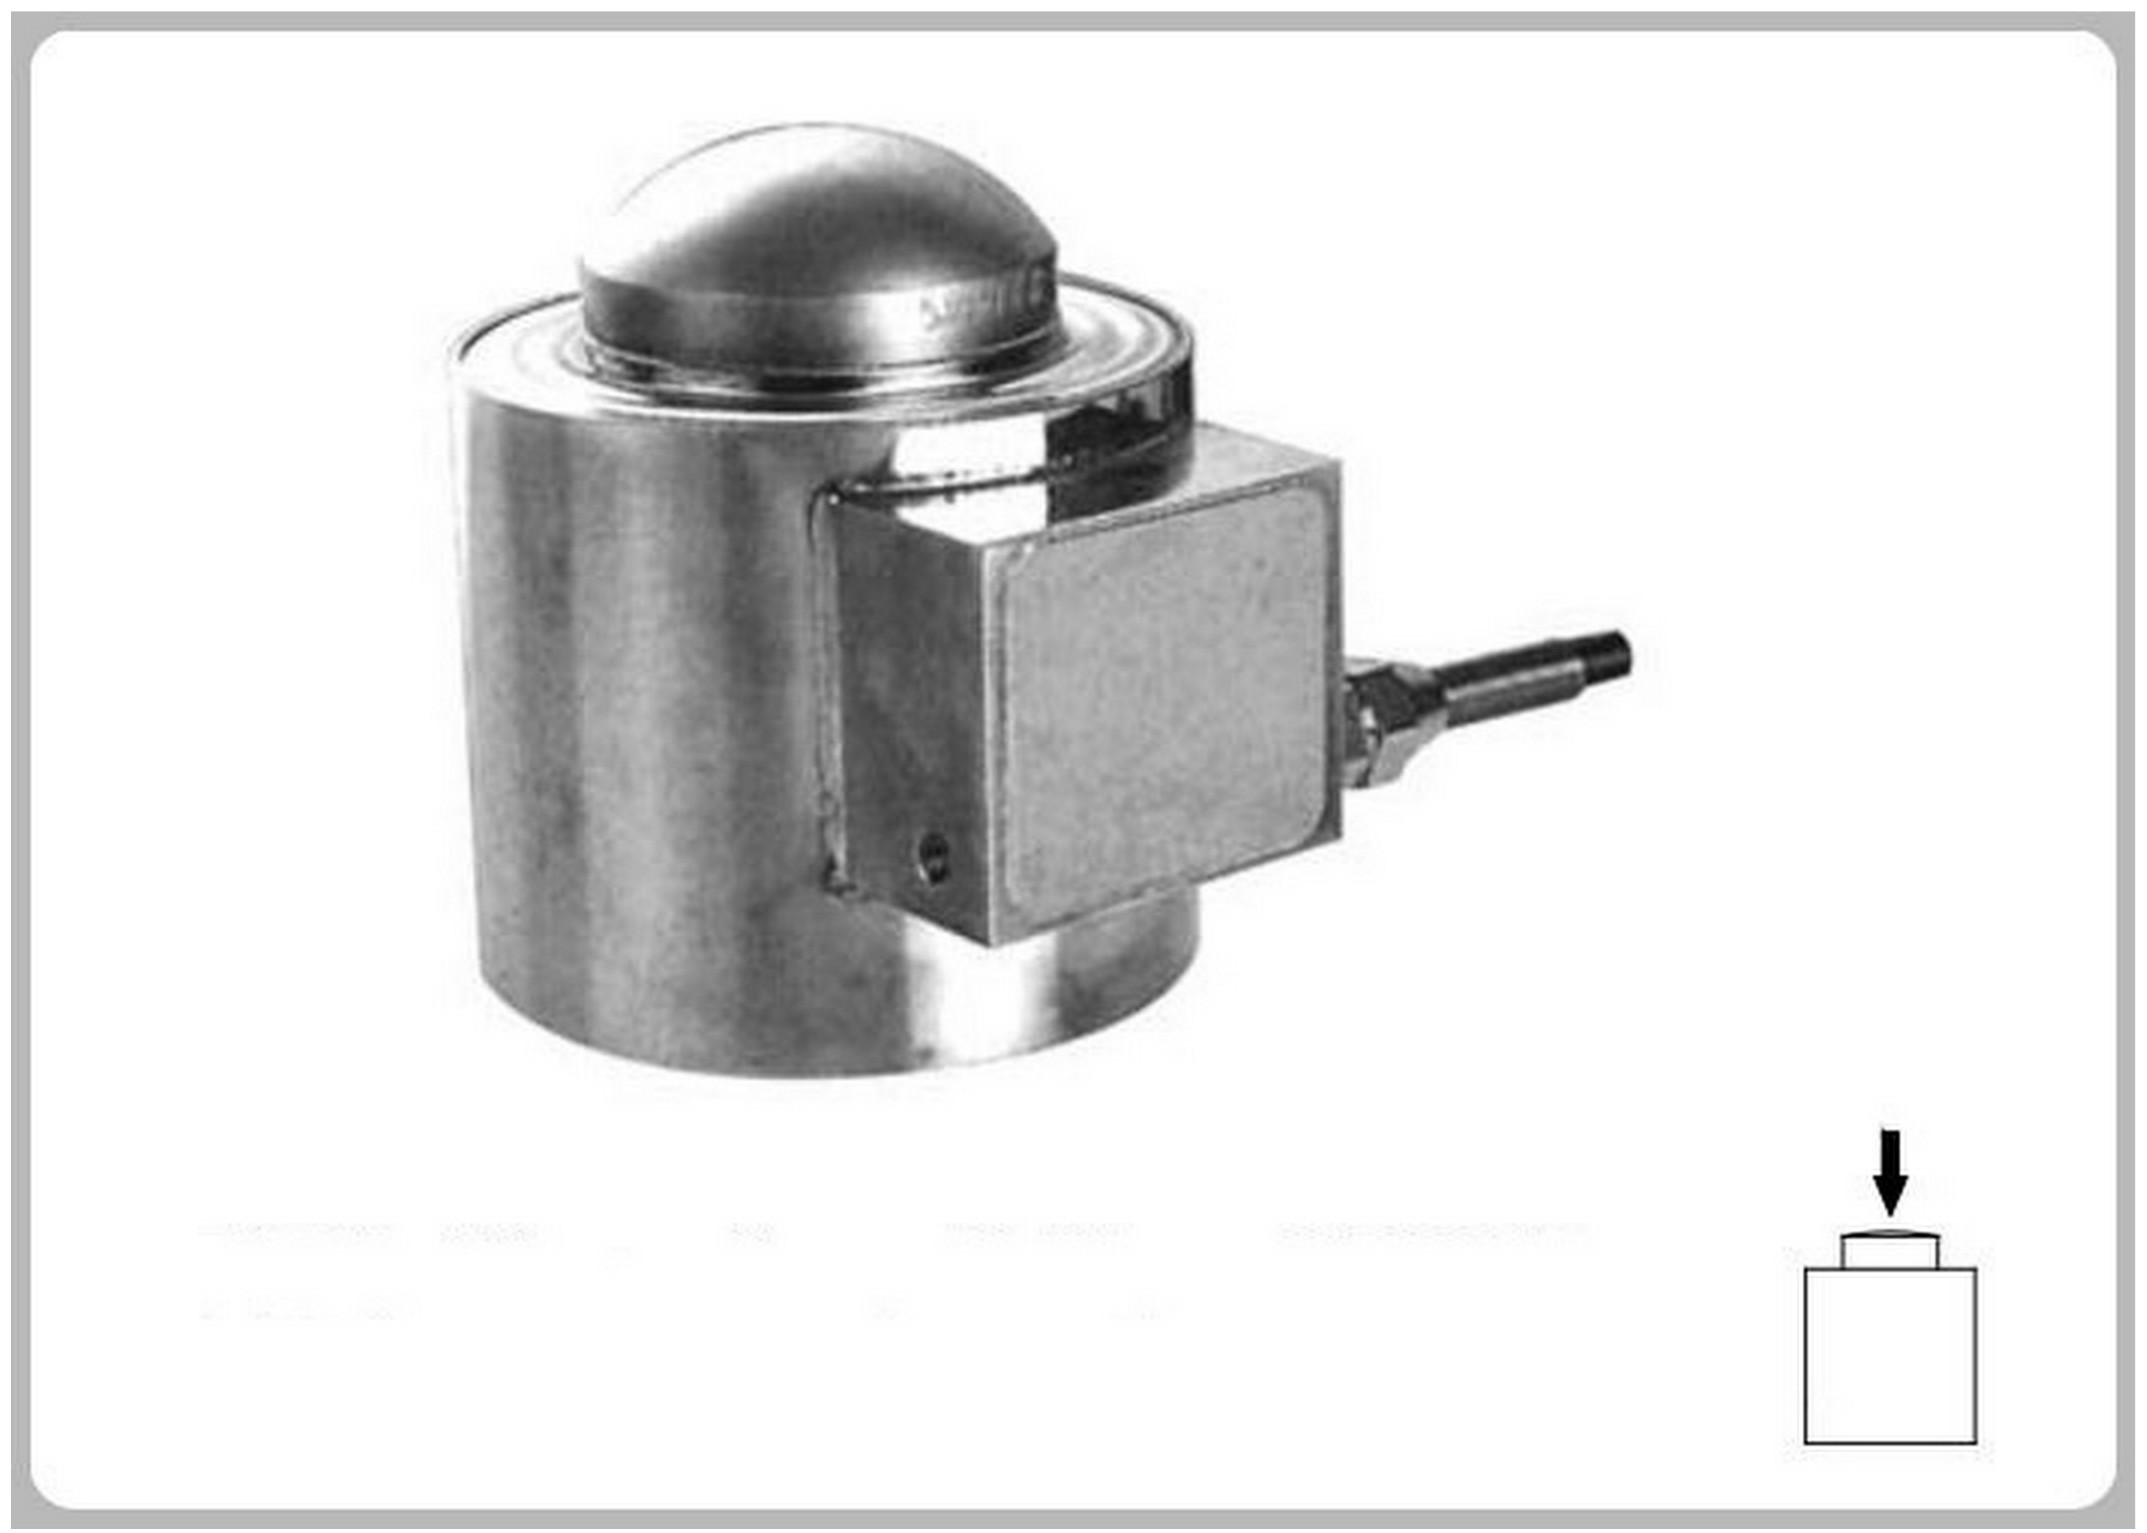 MC8203 LOAD CELL